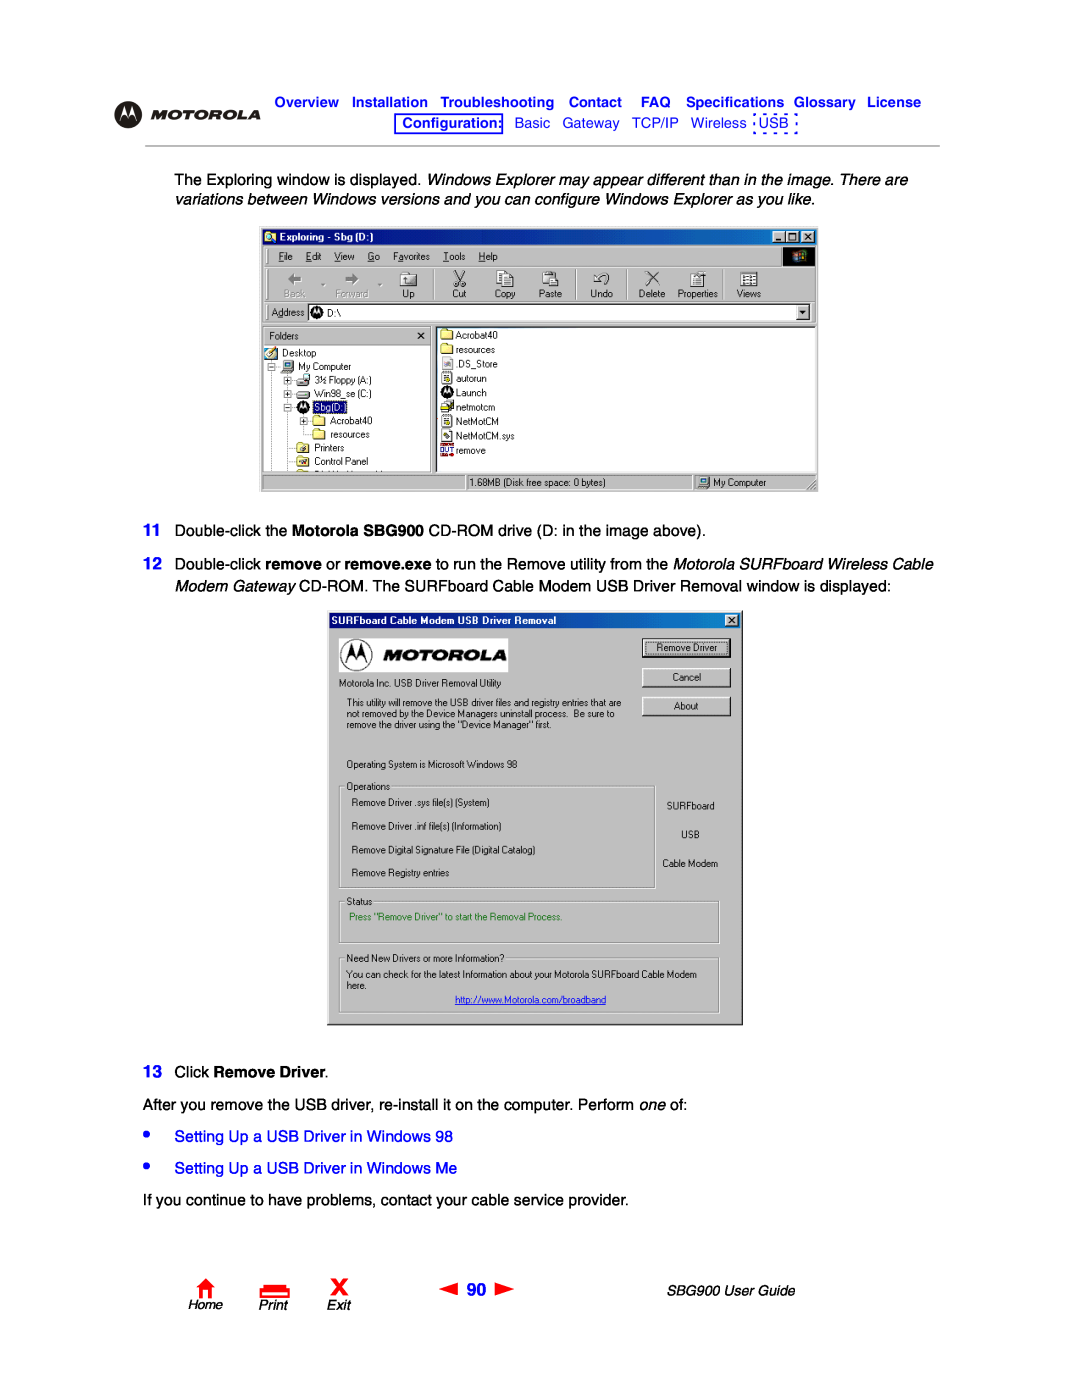 Motorola manual Click Remove Driver, Setting Up a USB Driver in Windows Me, Home Print Exit, SBG900 User Guide 